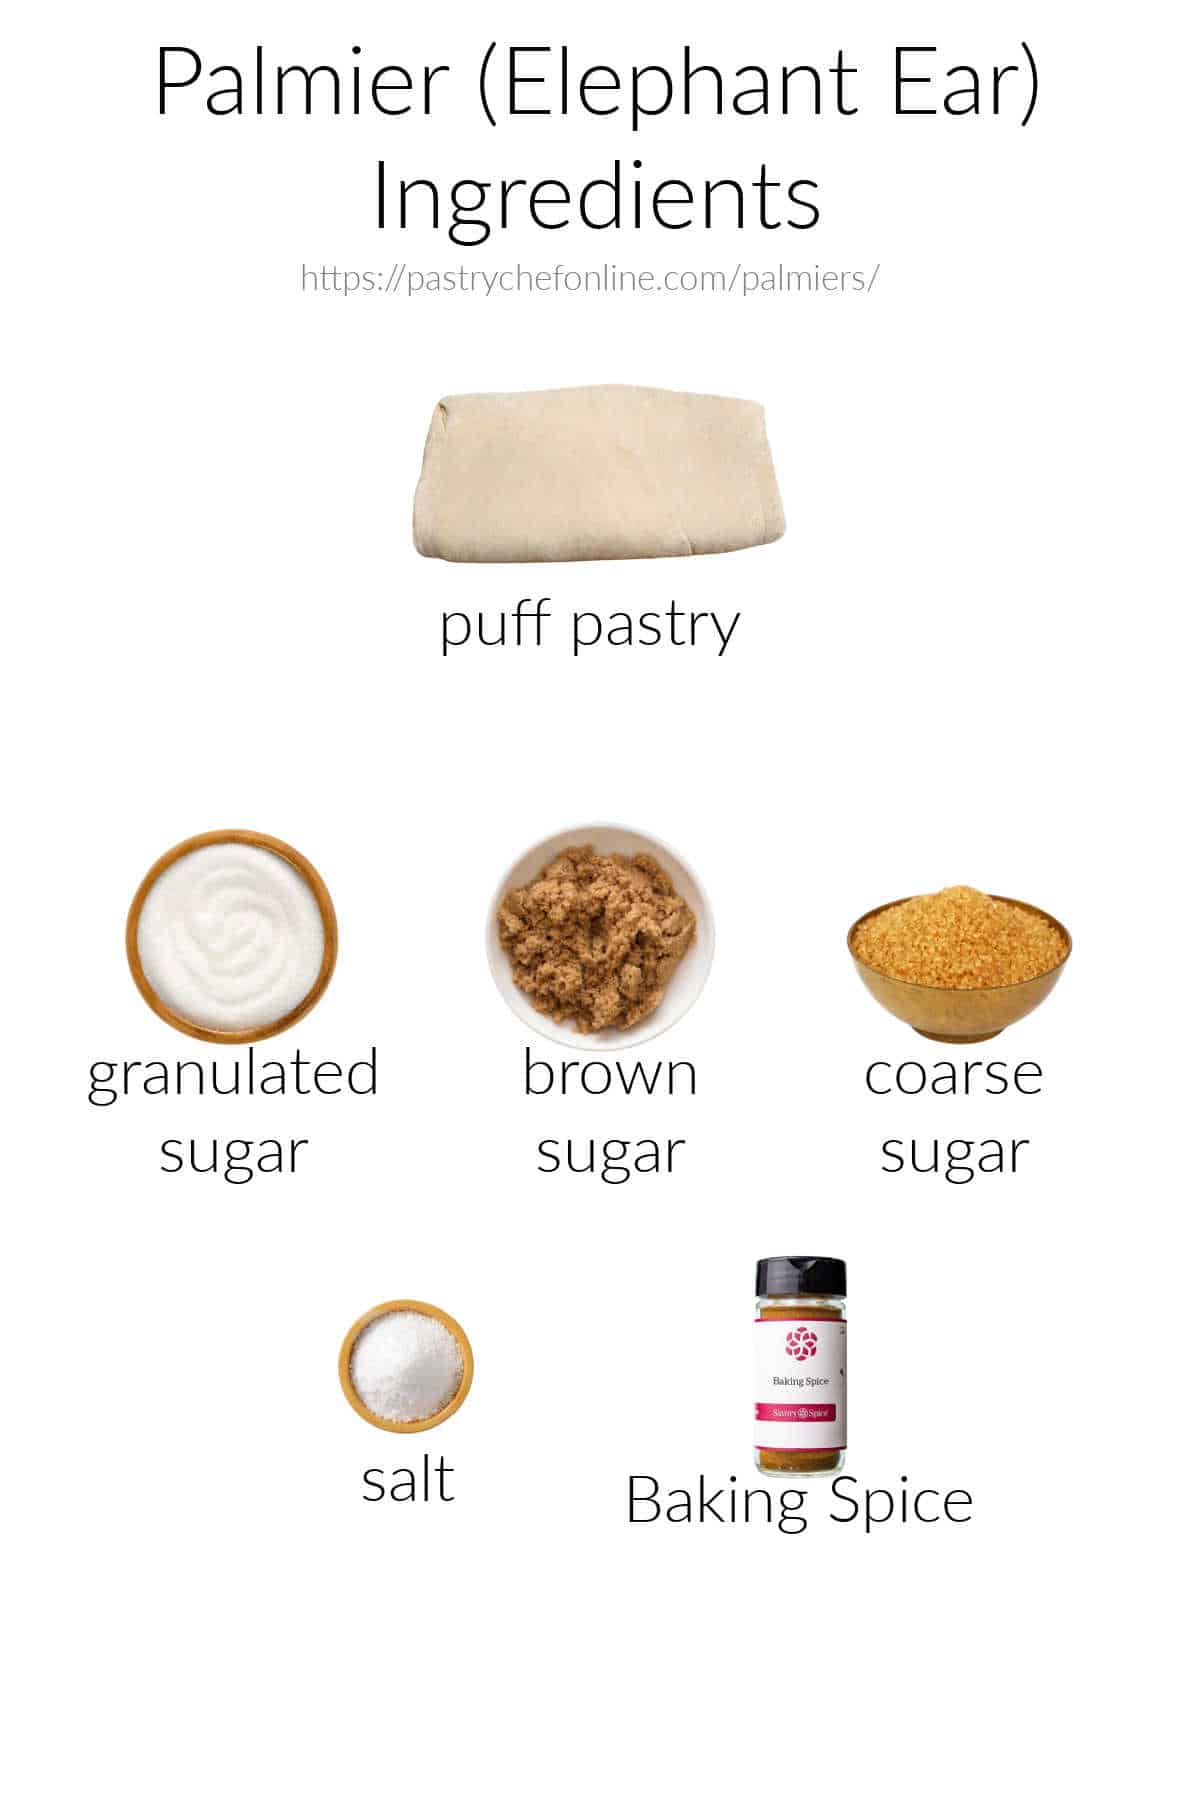 Images of all the ingredients needed to make palmiers, labeled and on a white background. The ingredients are: puff pastry, granulated sugar, brown sugar, coarse sugar, salt, and Baking Spice.